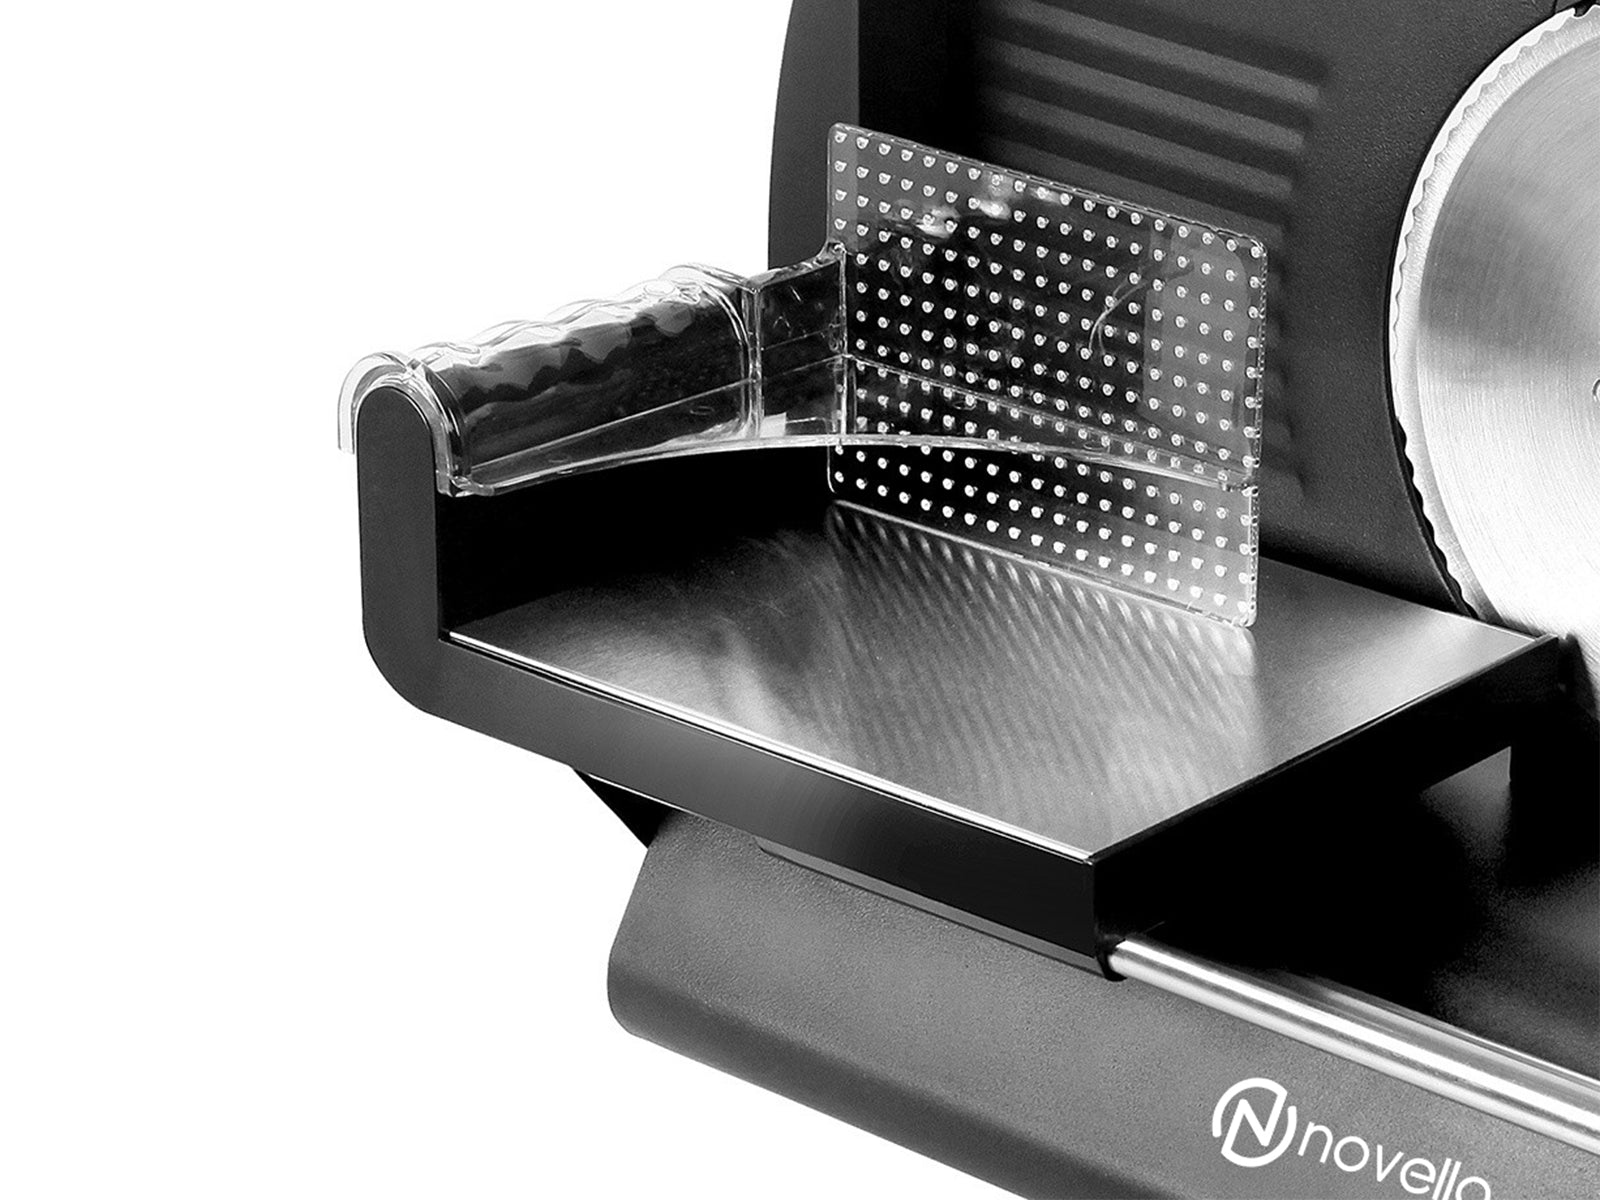 Chefman Die-Cast Electric Deli & Food Slicer Cuts Meat, Cheese, Bread,  Fruit & Vegetables Adjustable Slice Thickness, Stainless Steel Blade, Safe  Non-Slip Feet, For Home Use, Easy To Clean, Black 